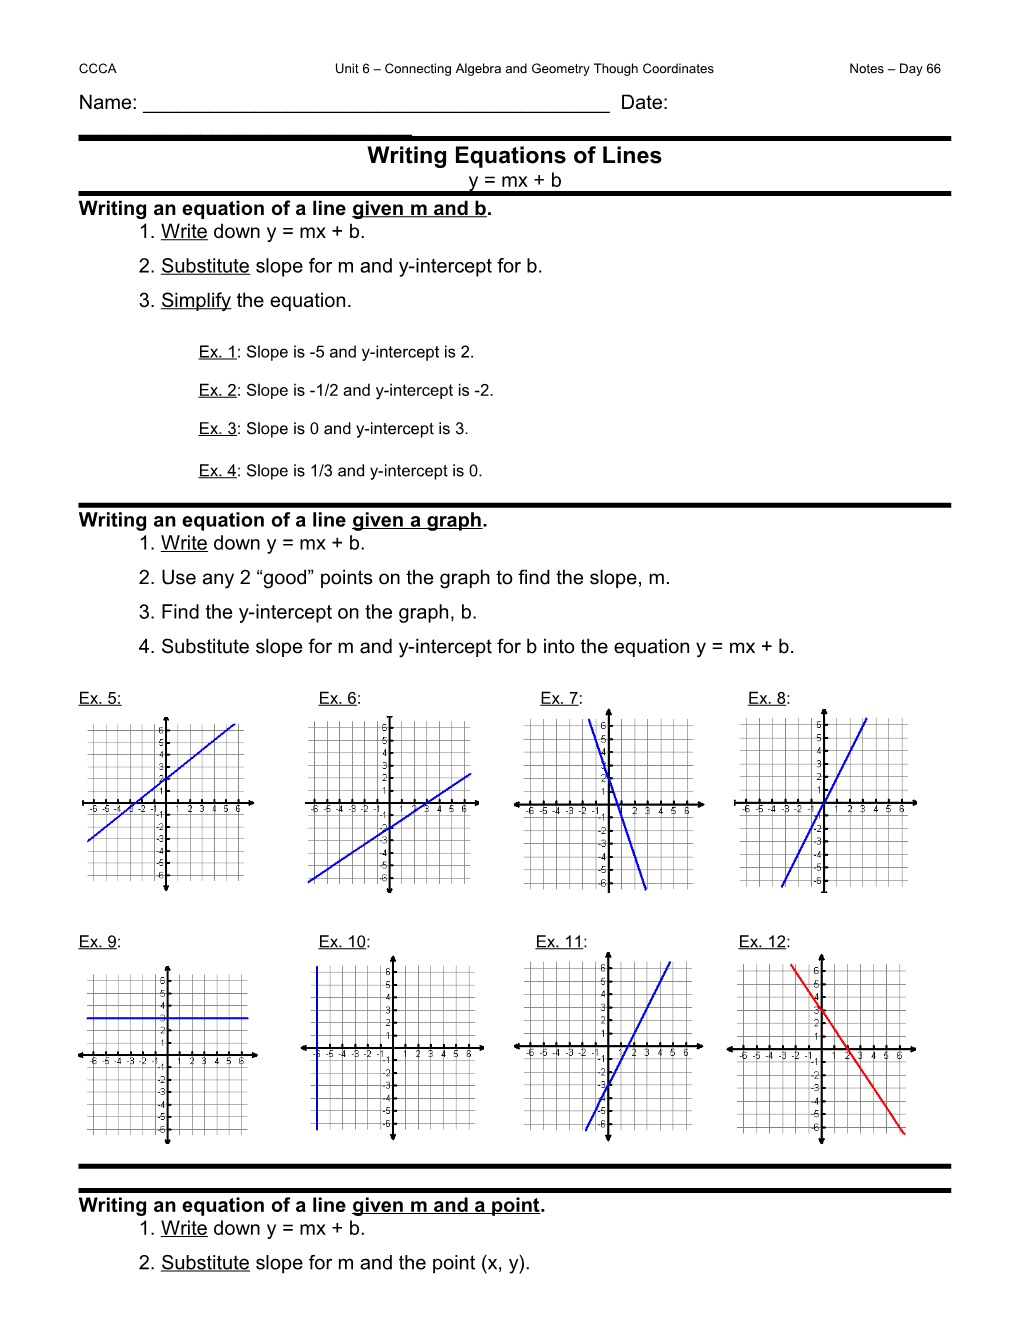 CCCA Unit 6 Connecting Algebra and Geometry Though Coordinates Notes Day 66